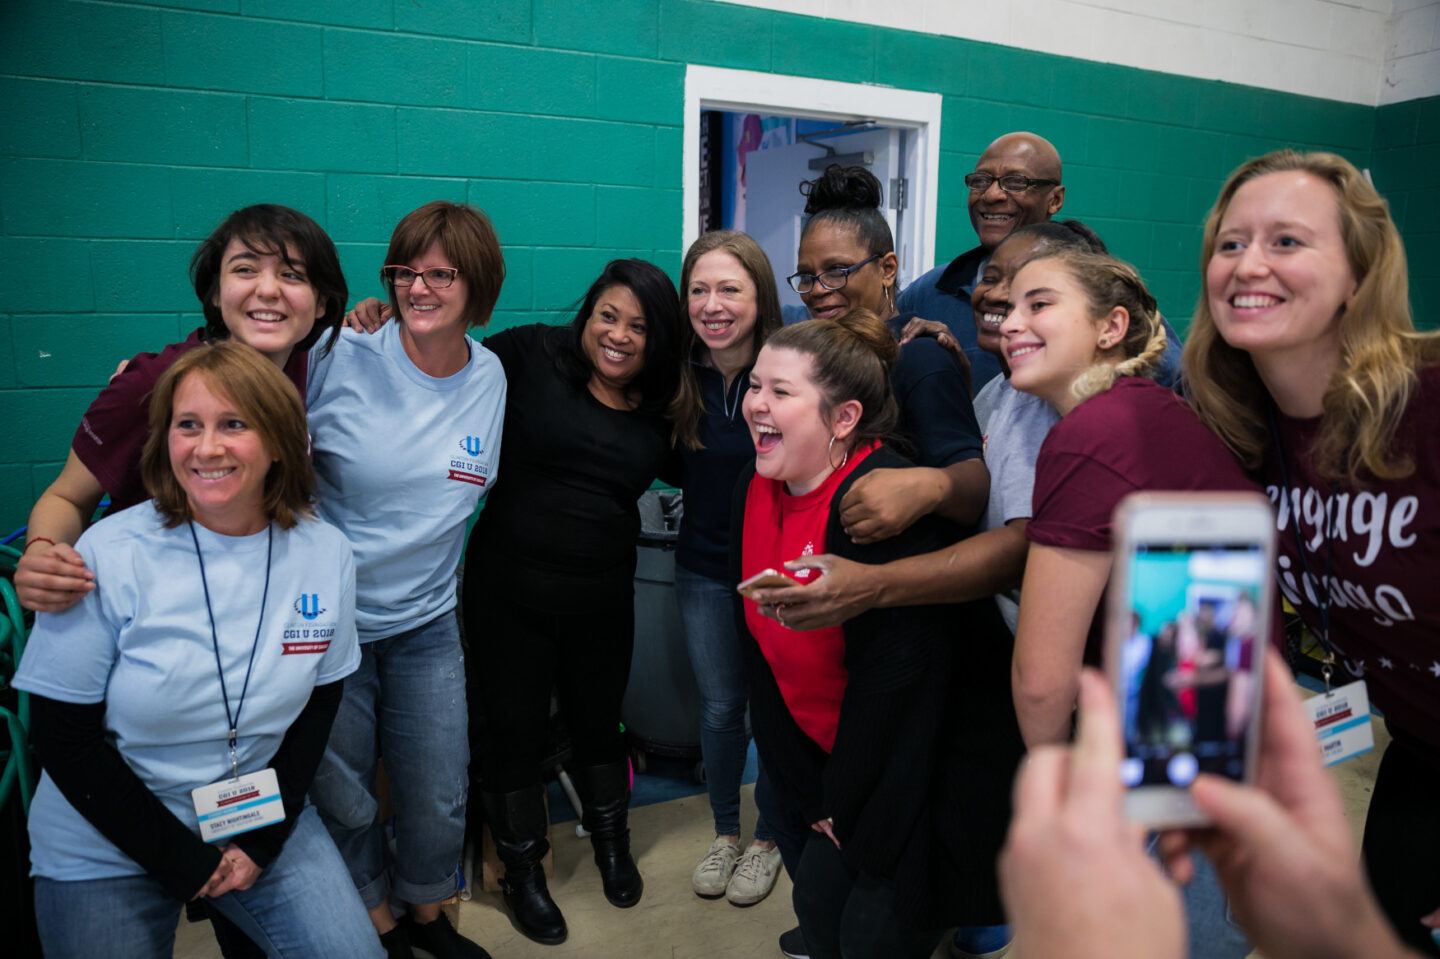 Chelsea Clinton joins students and volunteers for a Day of Action in Chicago